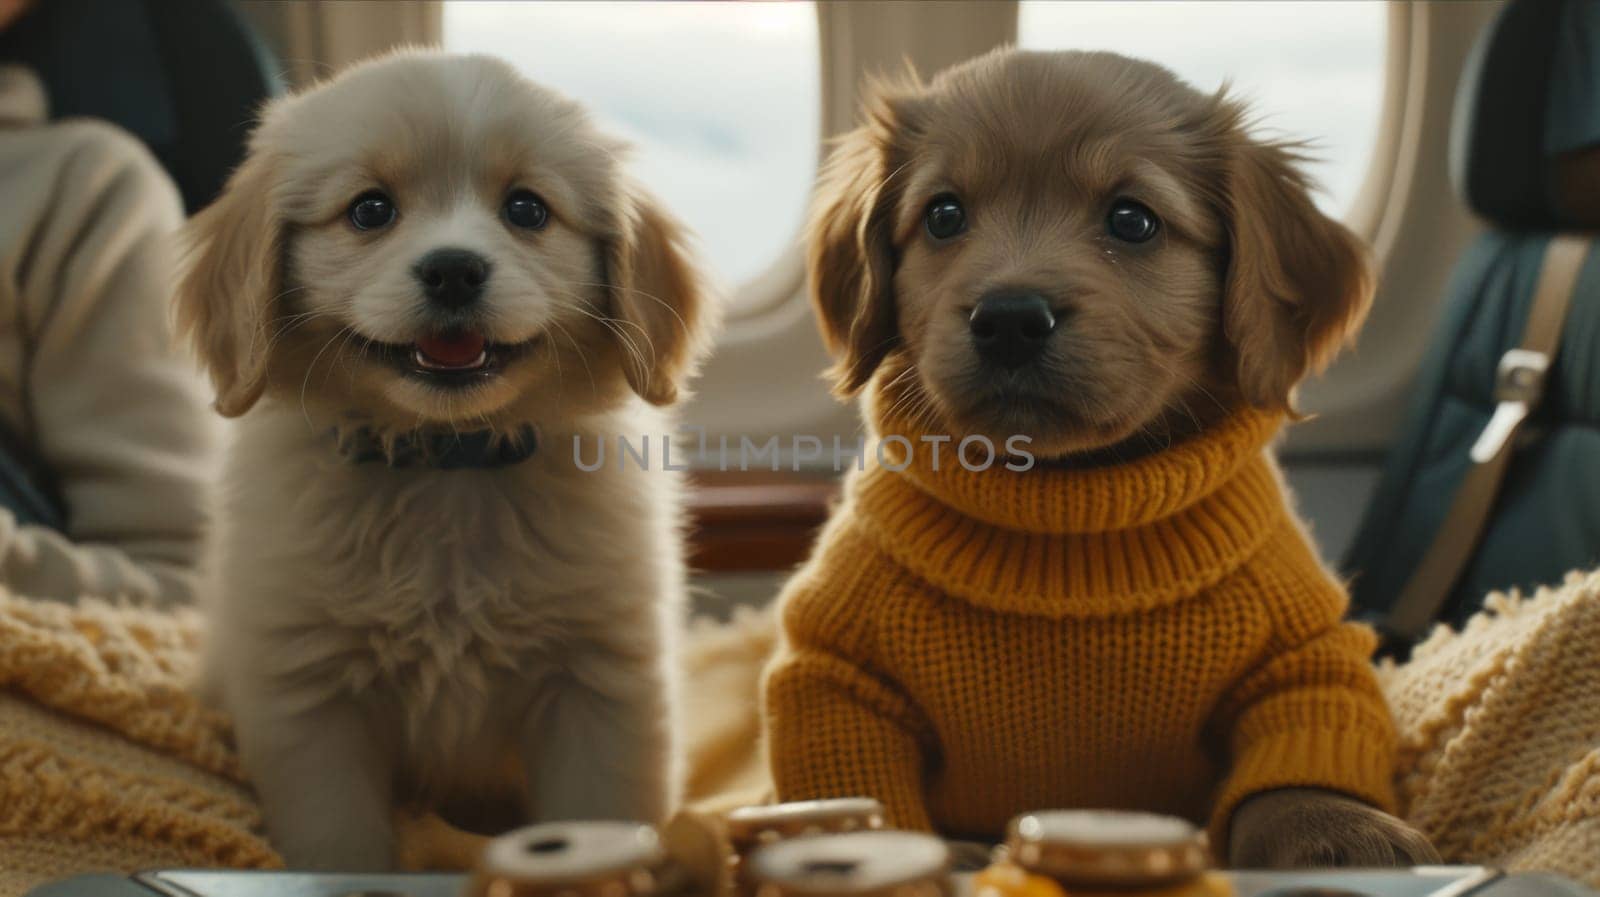 Two dogs in sweaters sitting on a plane next to some food, AI by starush